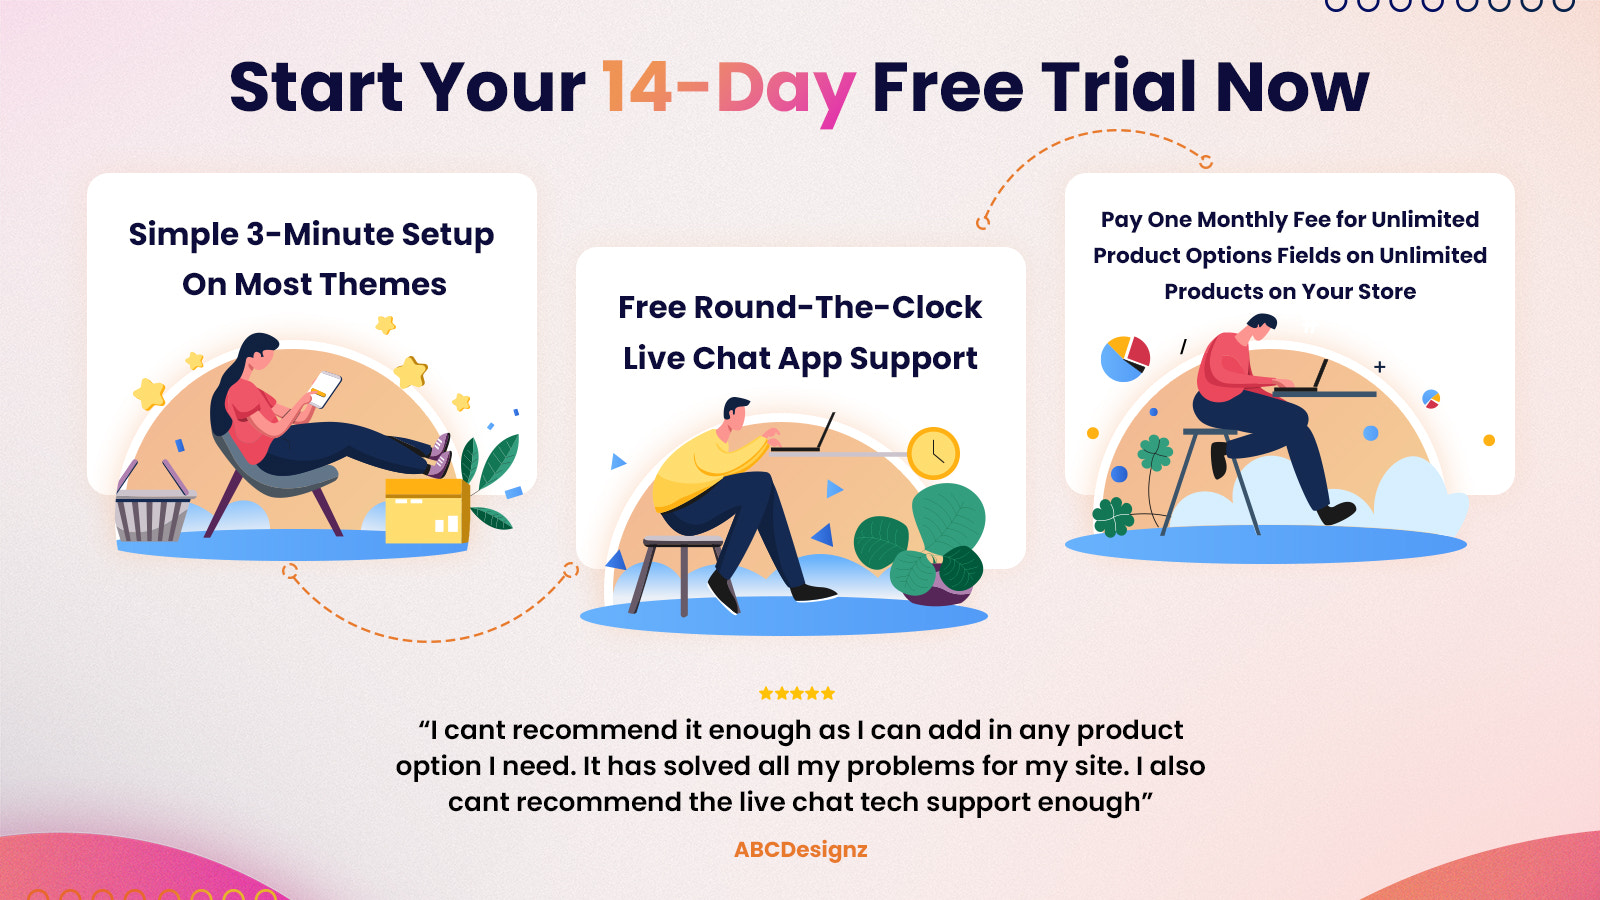 Product customizer product options with a 14-day free trial